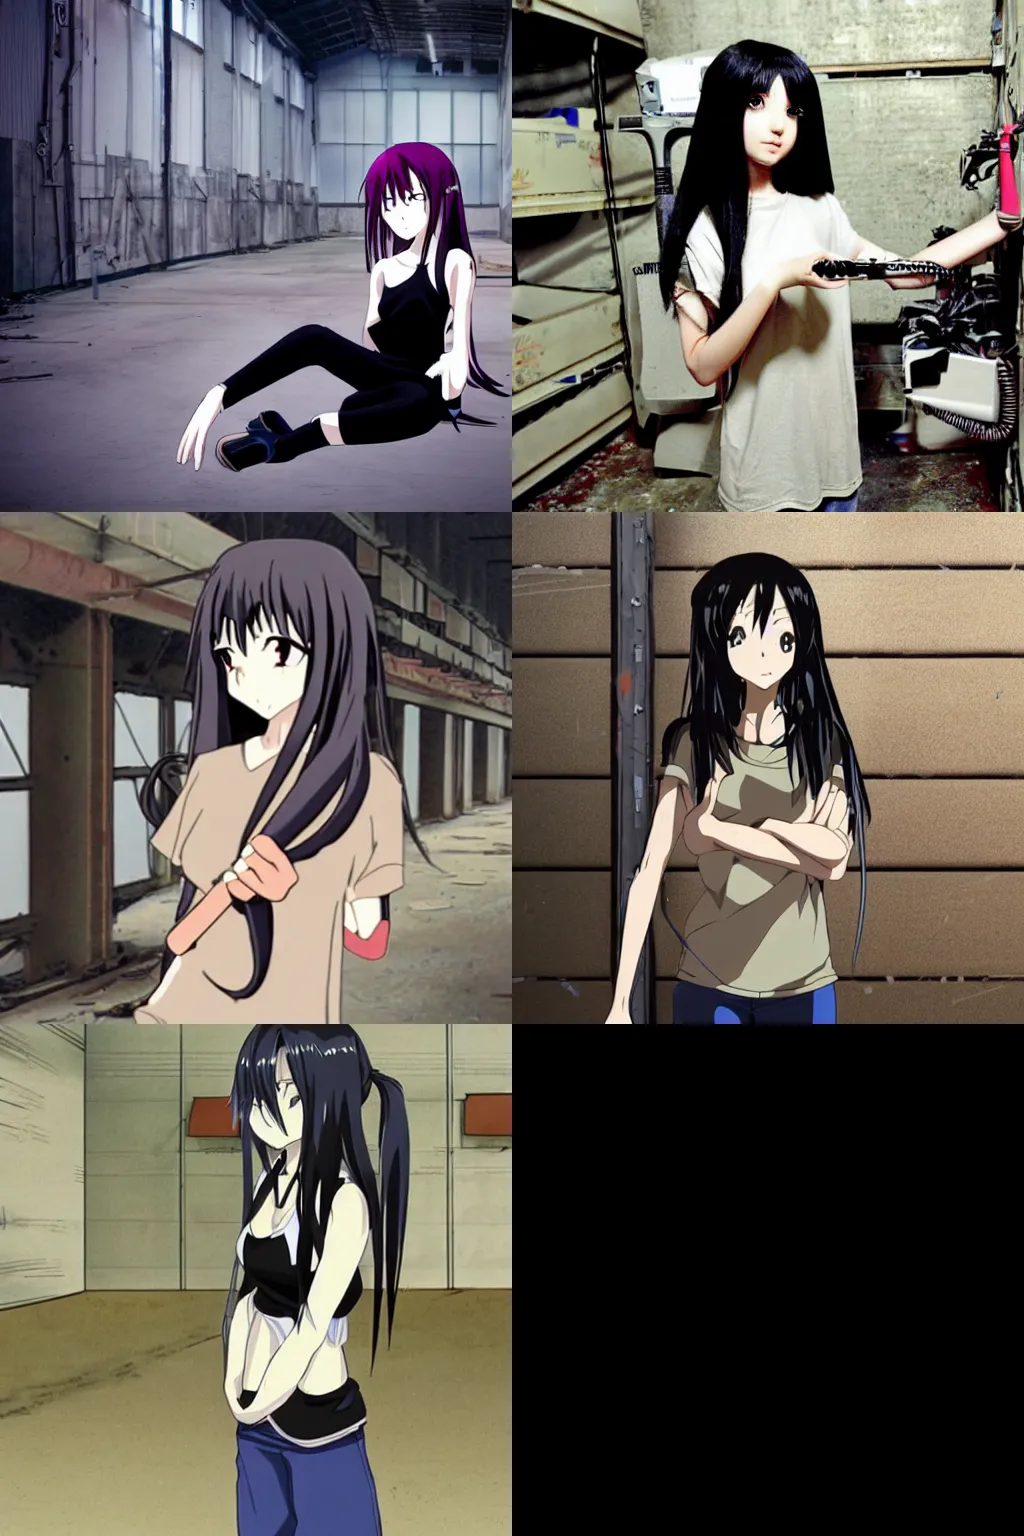 Prompt: A 2005 anime still of a 23 year old anime girl with long black hair, a baggy, worn out beige t shirt, and a mechanical arm in an abandoned warehouse